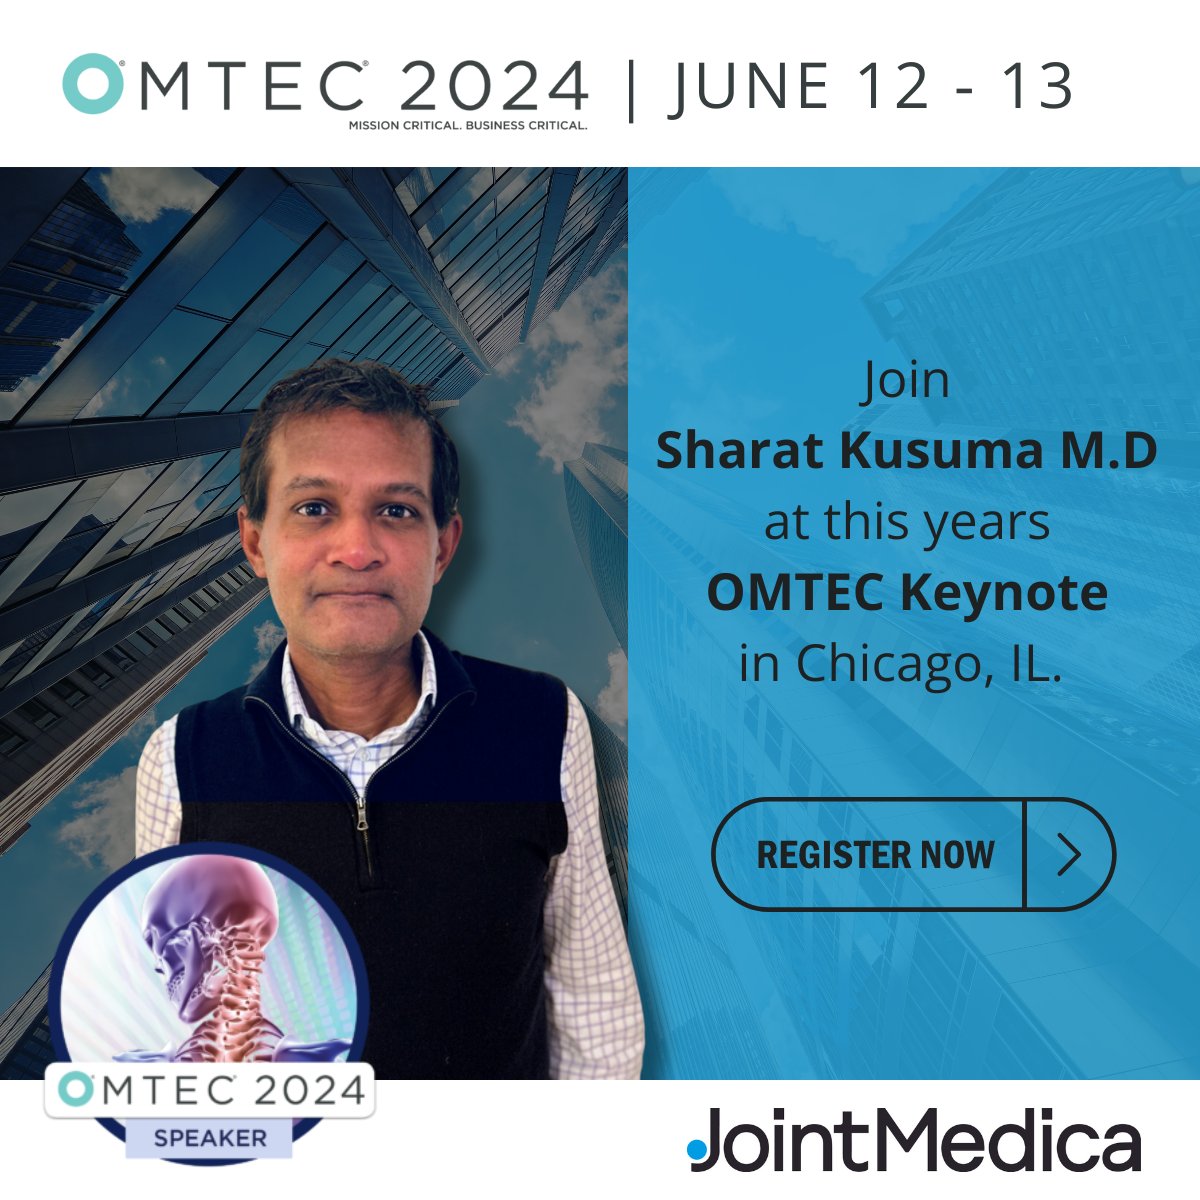 Exciting news! 📣 OMTEC 2024 is just one month away! JointMedica President, Sharat Kusuma, MD, will share the stage with Dr. Ira Kirschenbaum MD, Editor in Chief of JOEI, at this year's OMTEC Keynote. They'll be diving into the theme 'Surgeon Entrepreneurs Identify Opportunities